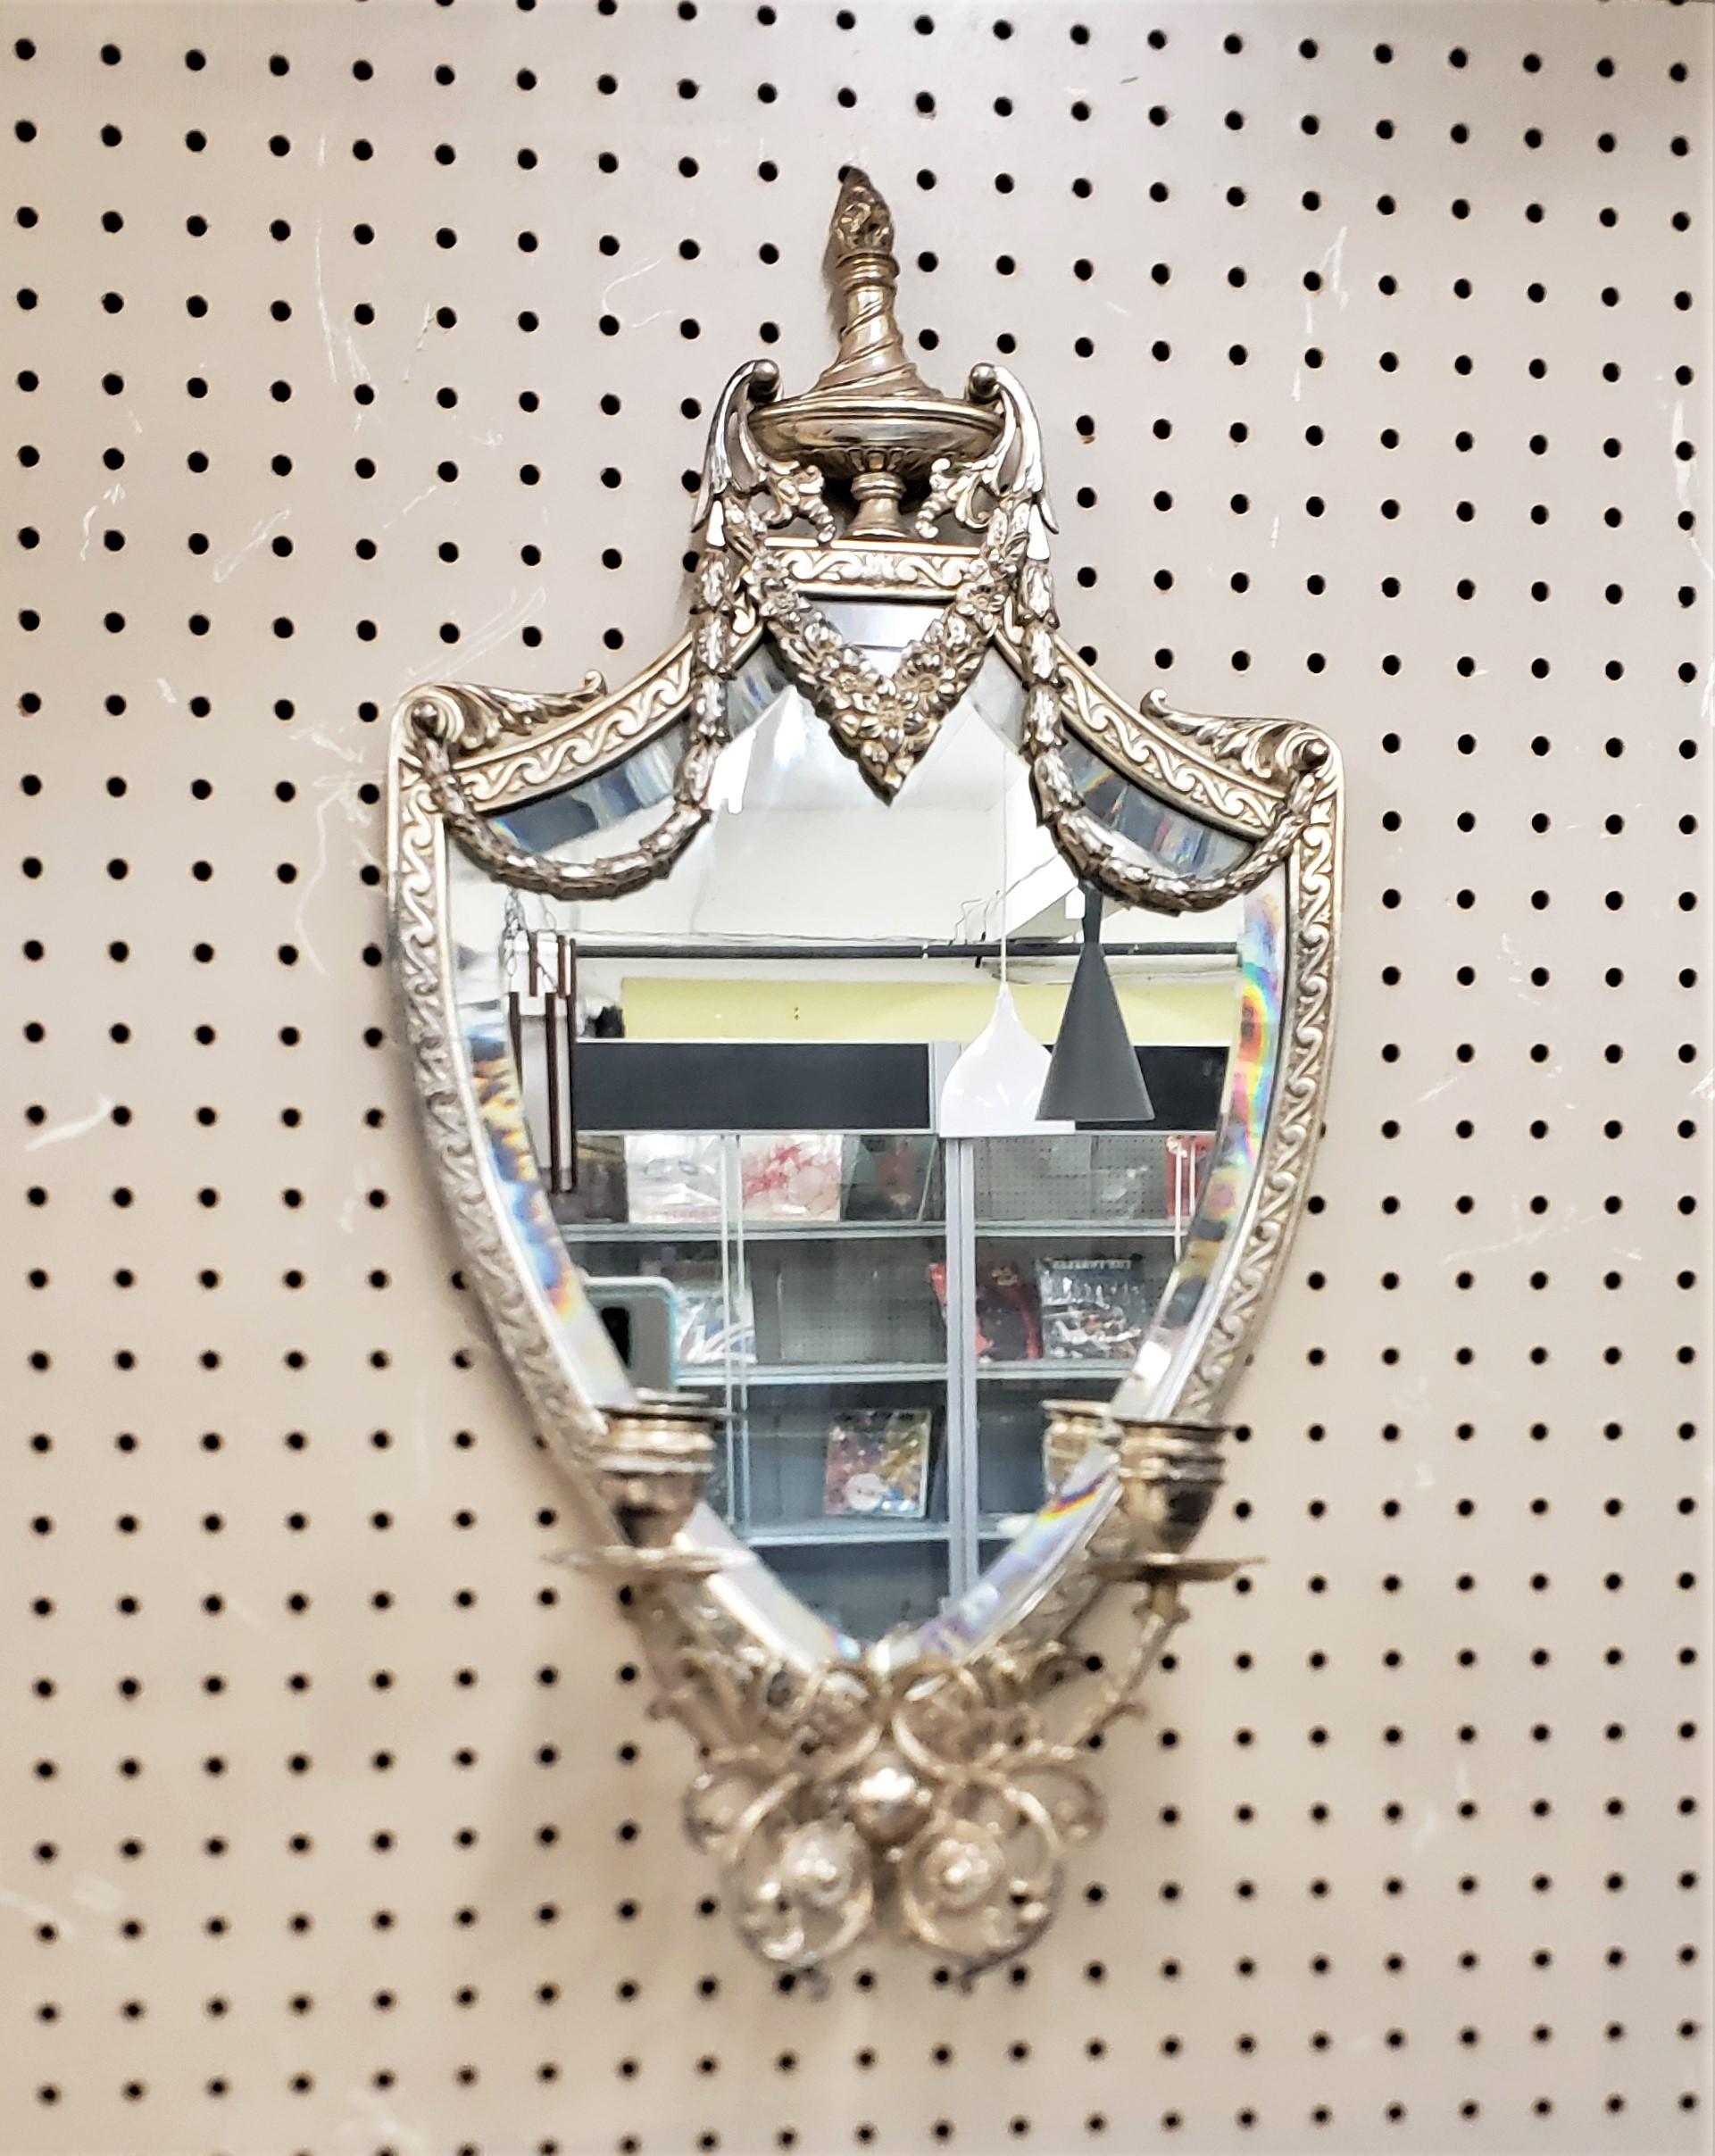 This antique silver plated wall mirror or candle sconce is marked by an Unknown maker on the back, but presumed to have been made in the United States in approximately 1900. The beveled wall mirror is shield shaped with raised vine and garland